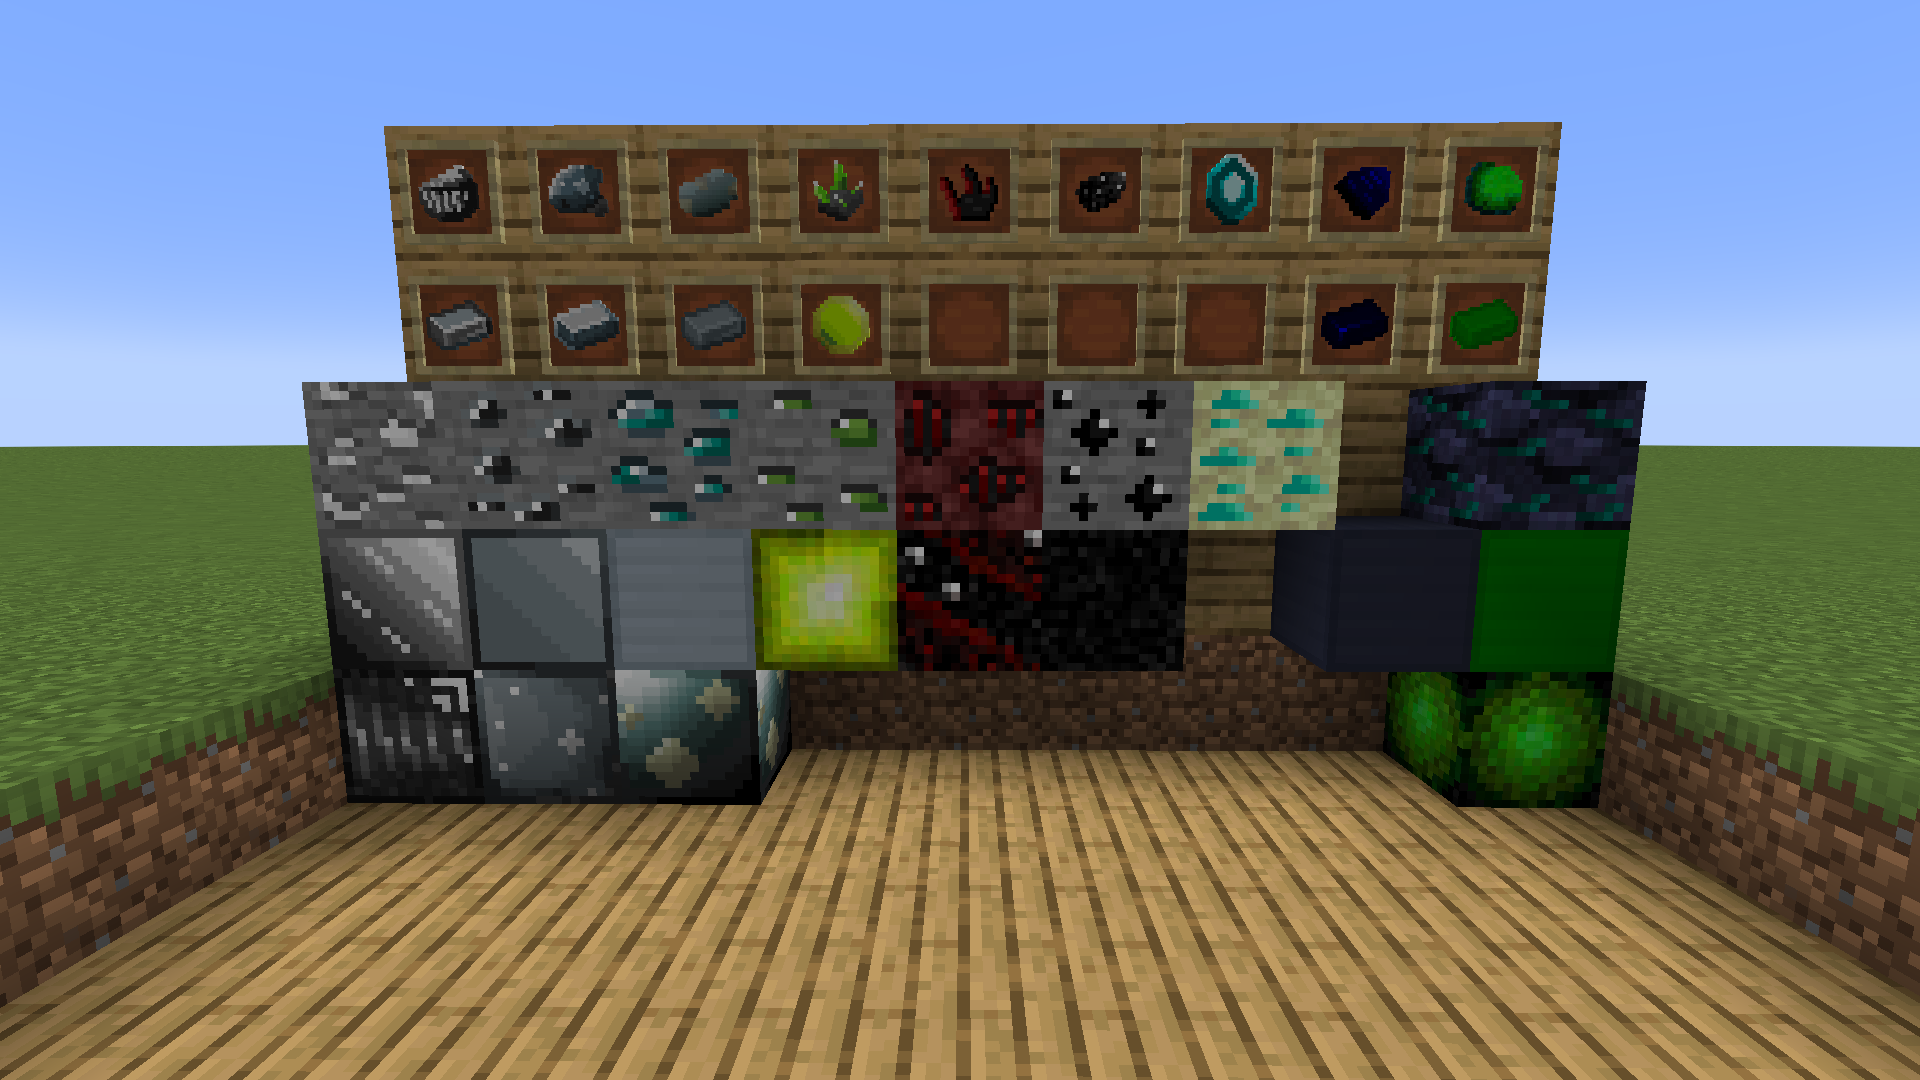 Ores and Blocks of the ores found in the mod